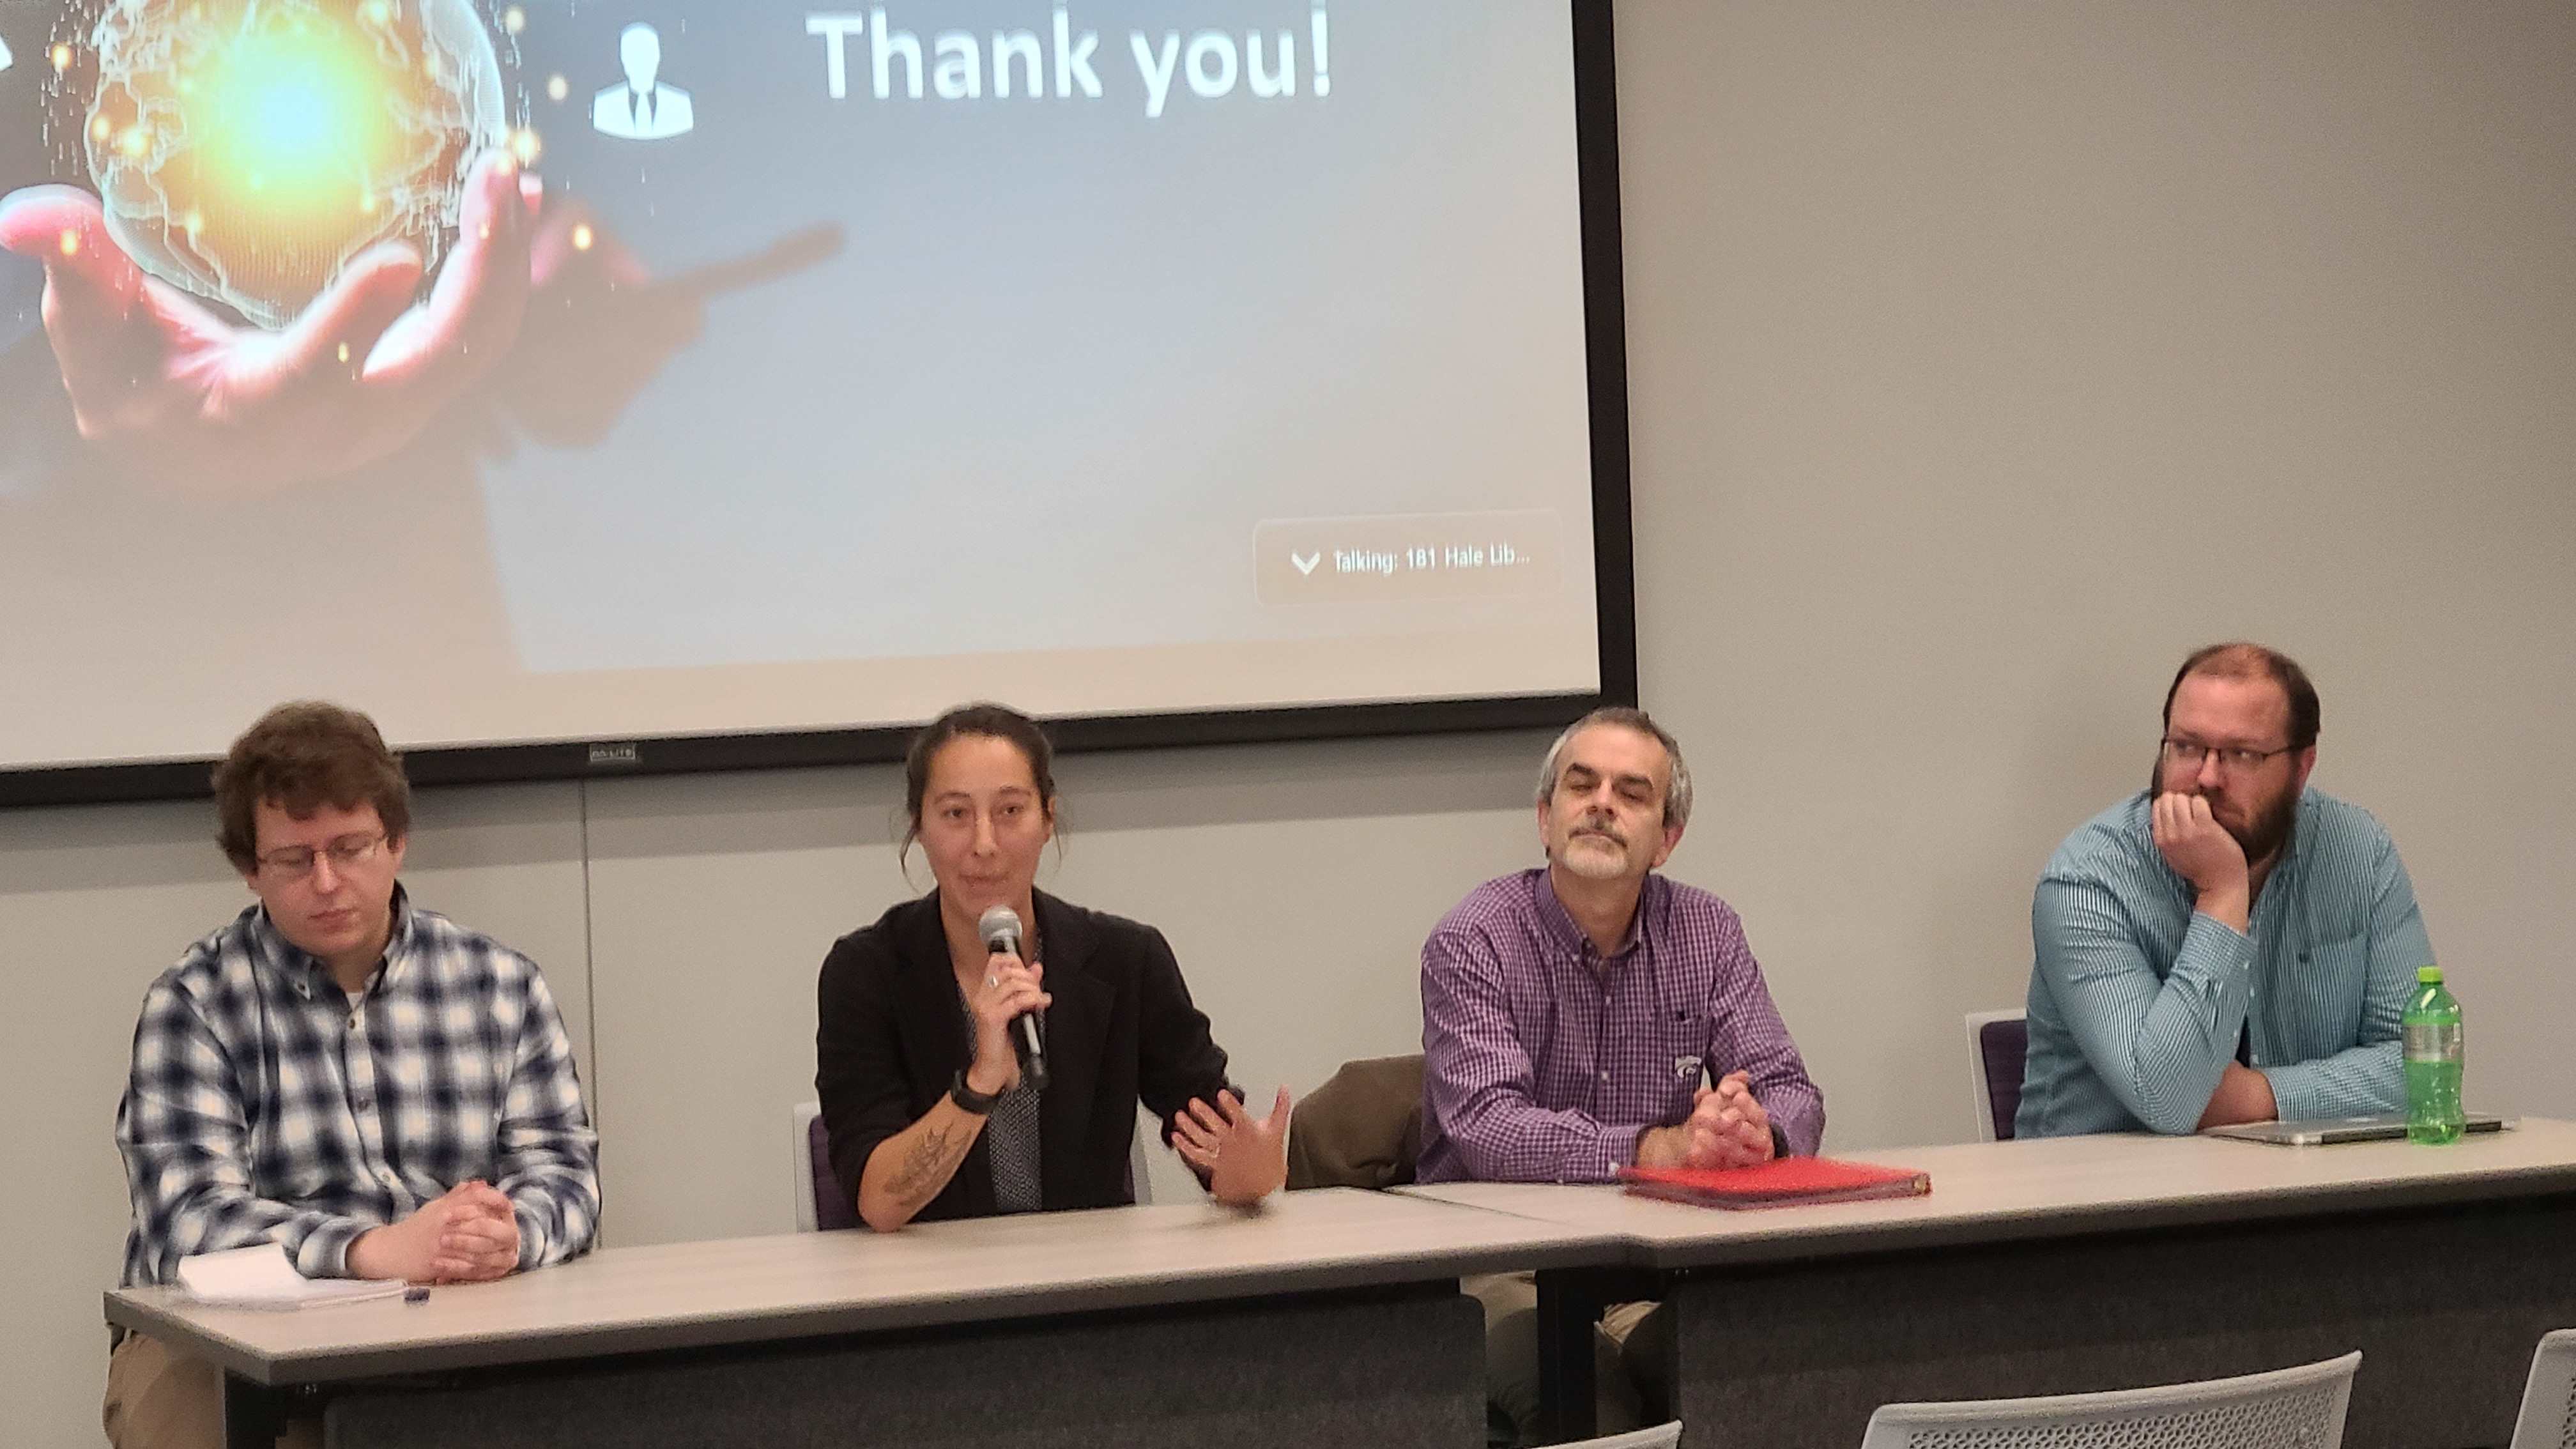 AI symposium panel "AI and Data Ownership: Navigating the Ethical Labyrinth" with (left-right) Jack Himelright, Camila Hernandez-Flowerman, Roger McHaney and JT Laverty.